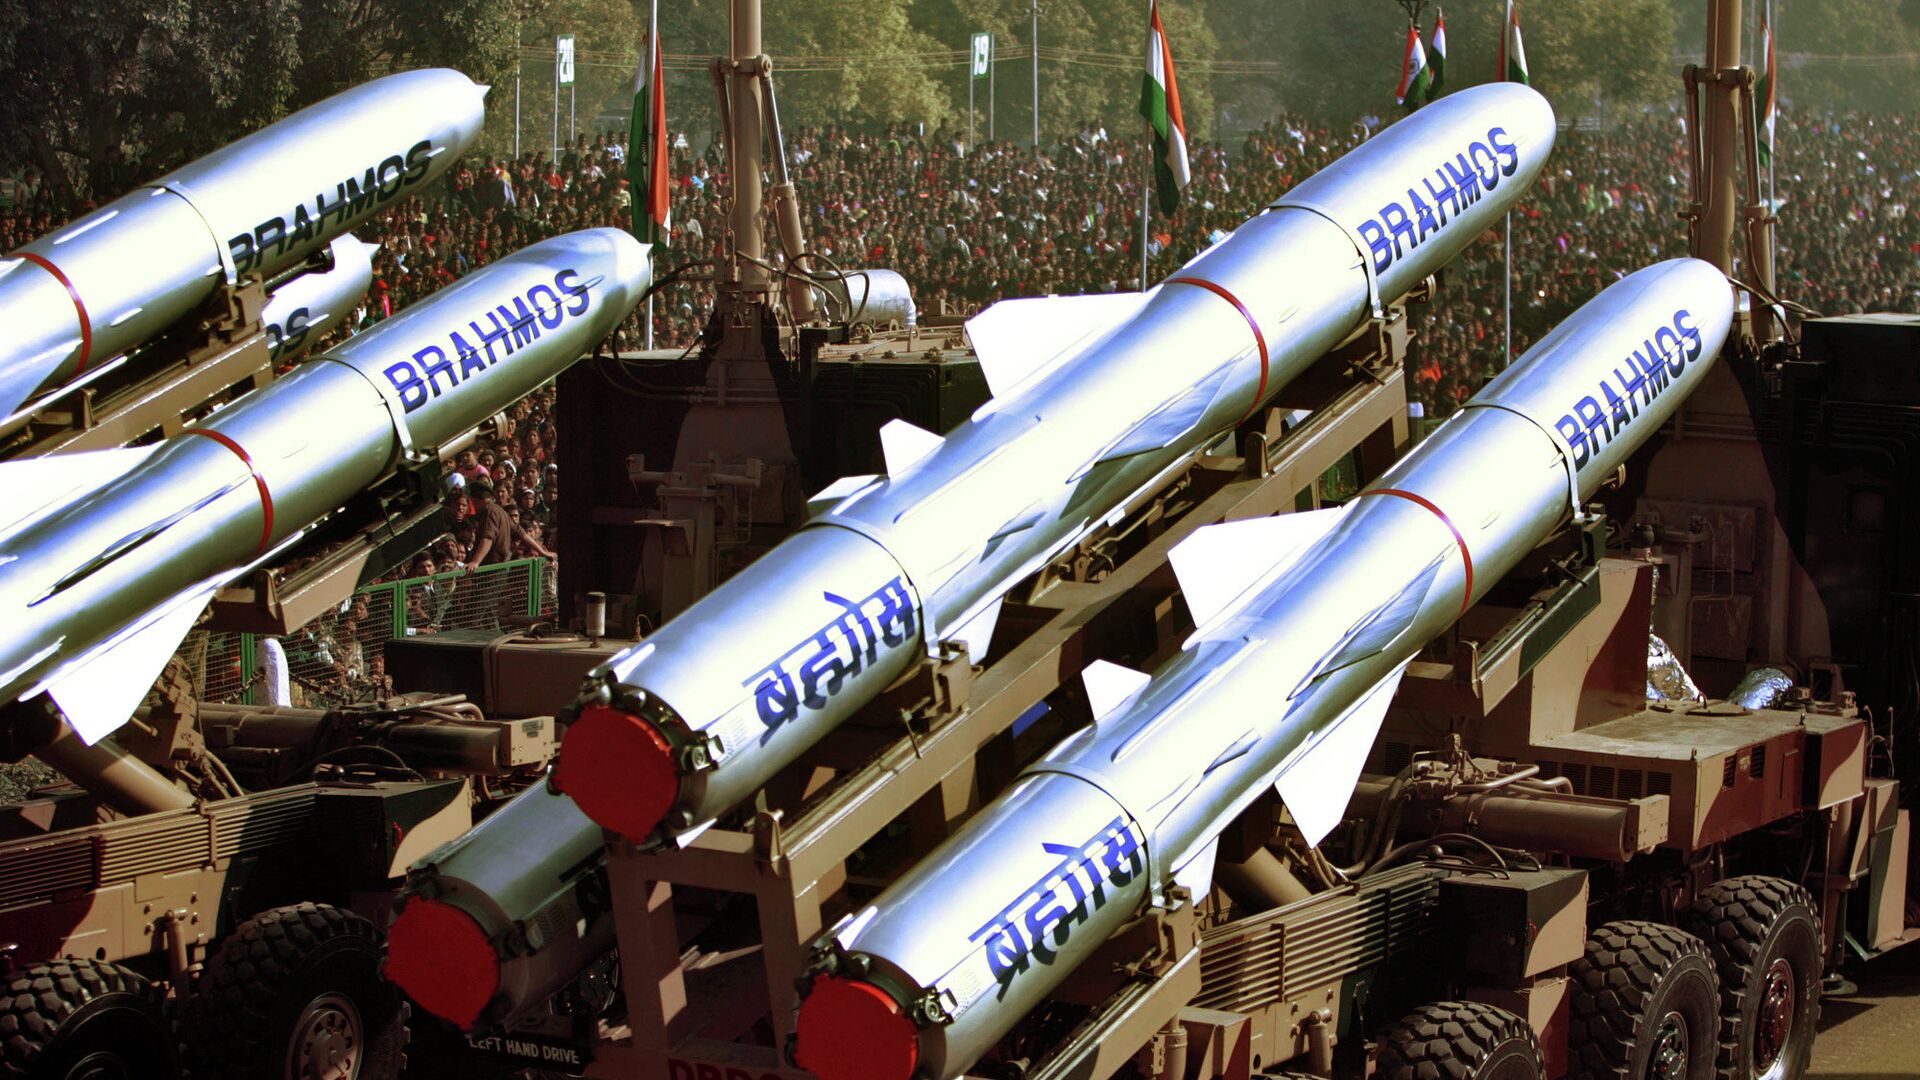 The Indian Army's Brahmos Missiles, a supersonic cruise missile, are displayed during the Republic Day Parade in New Delhi, India. - Sputnik India, 1920, 05.03.2023